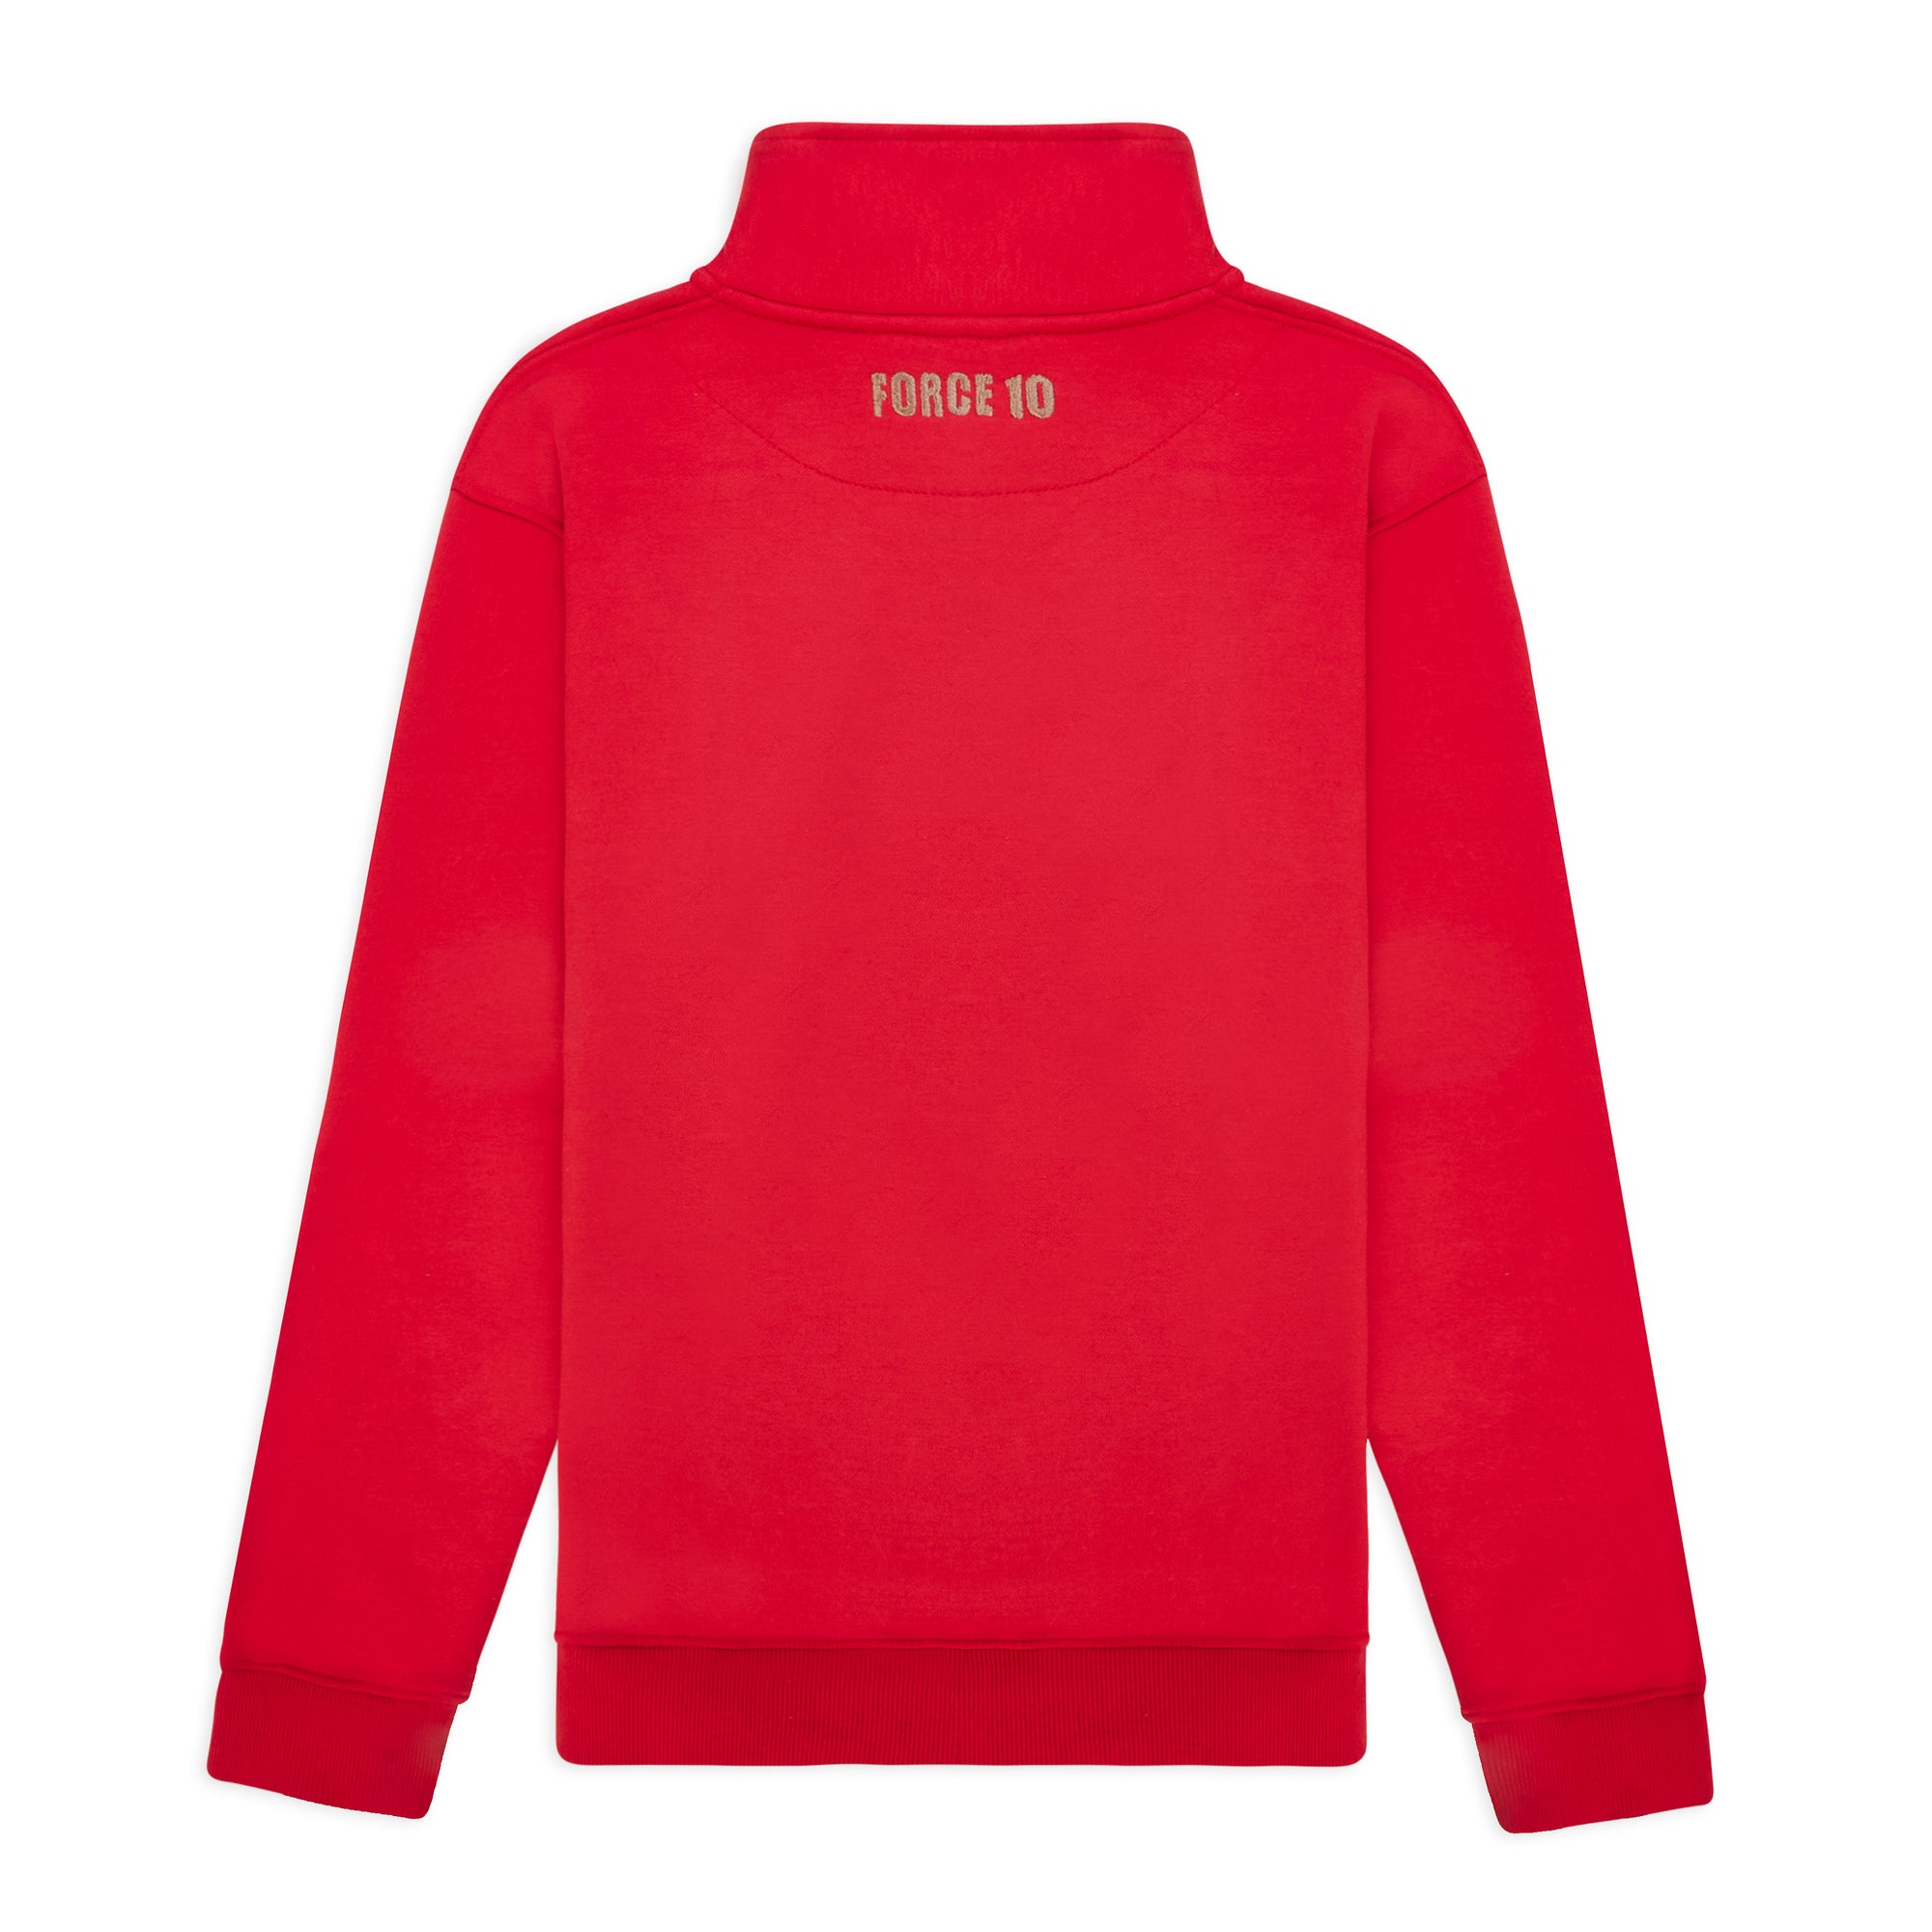 FORCE 10 OFFICIAL ⚓️ RED PORT SIDE 1/4 ZIP